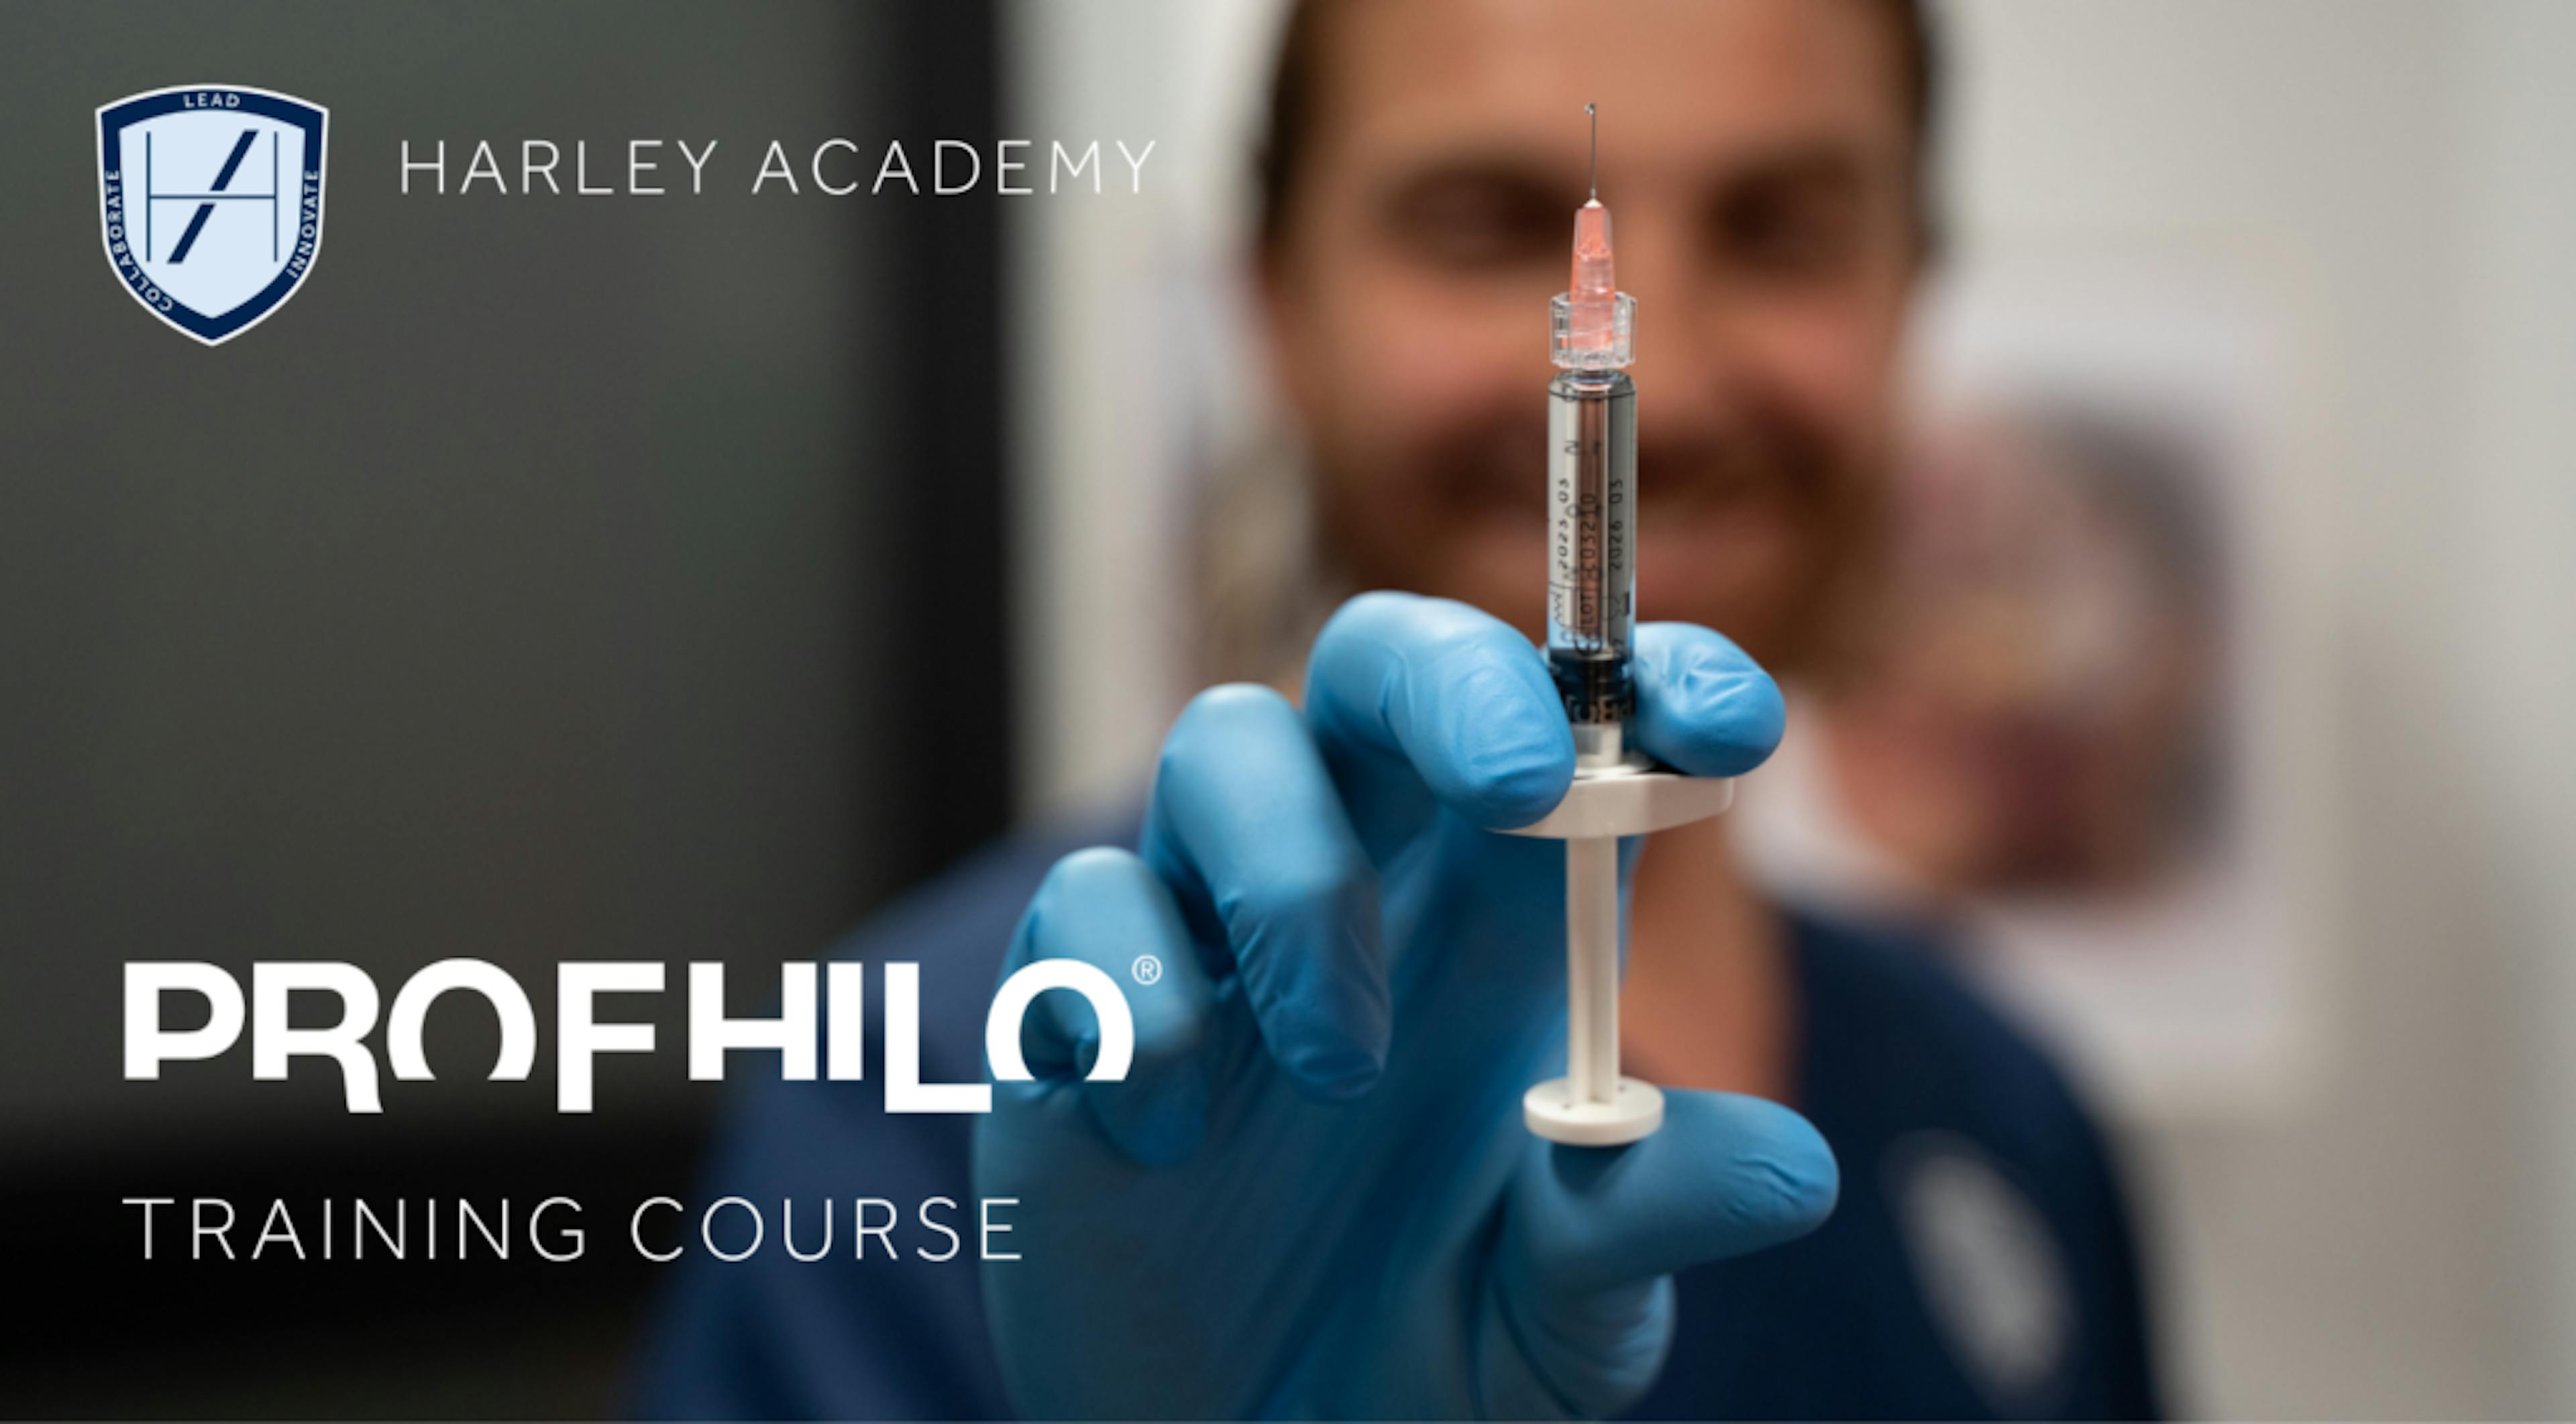 Profhilo Training Course Harley Academy